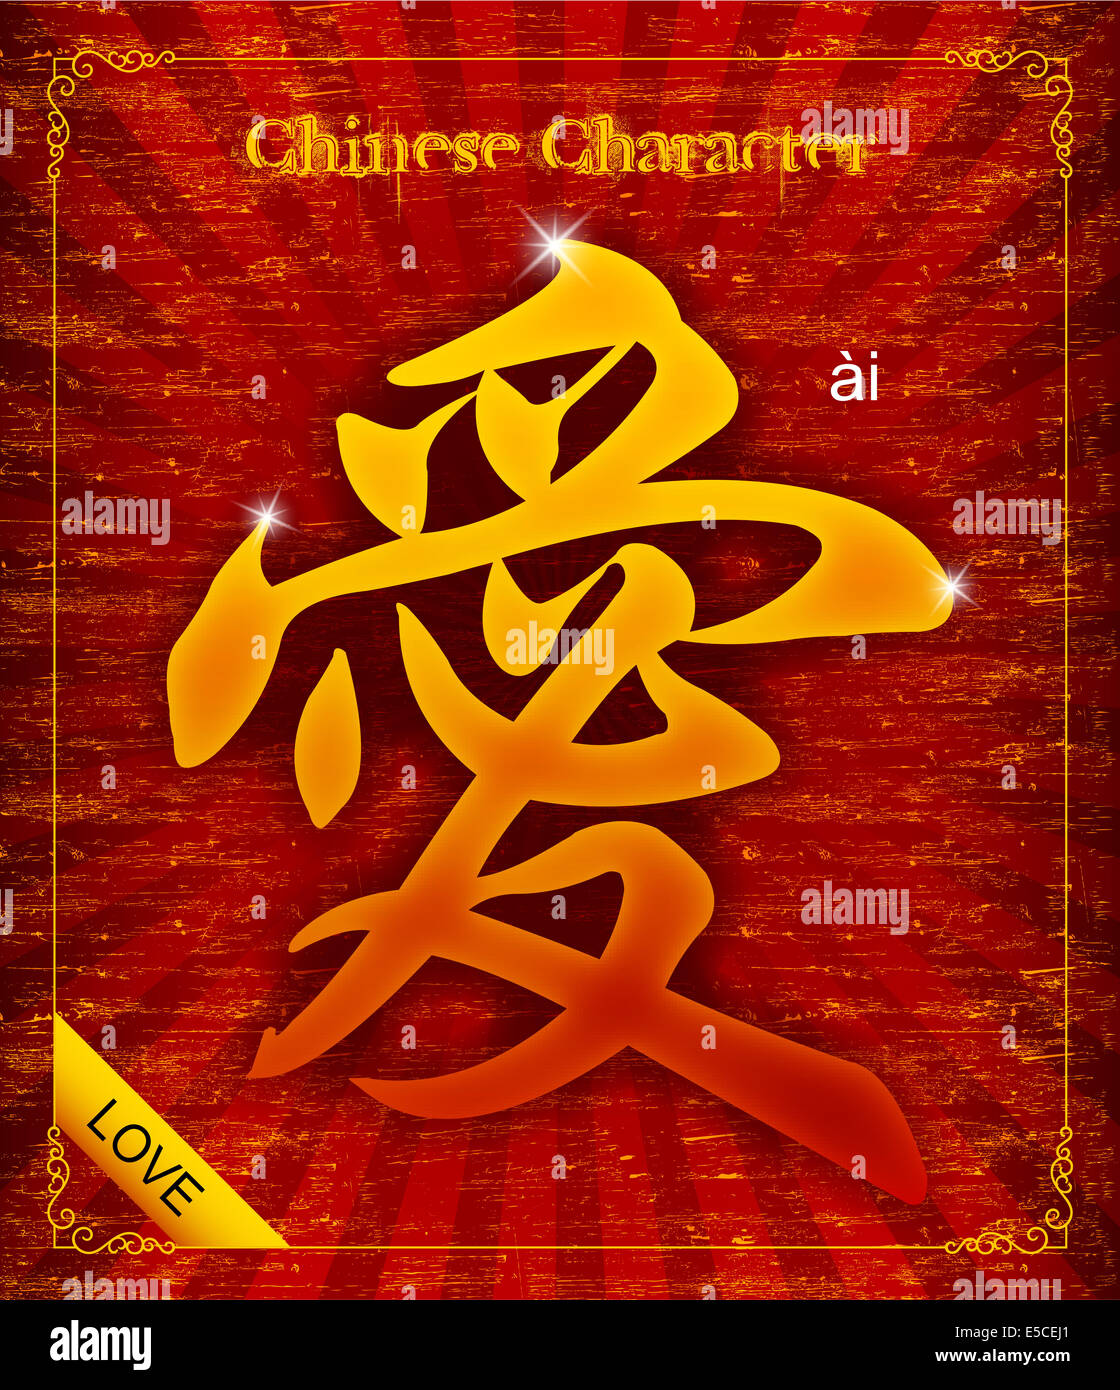 Chinese character calligraphy-Love Stock Photo